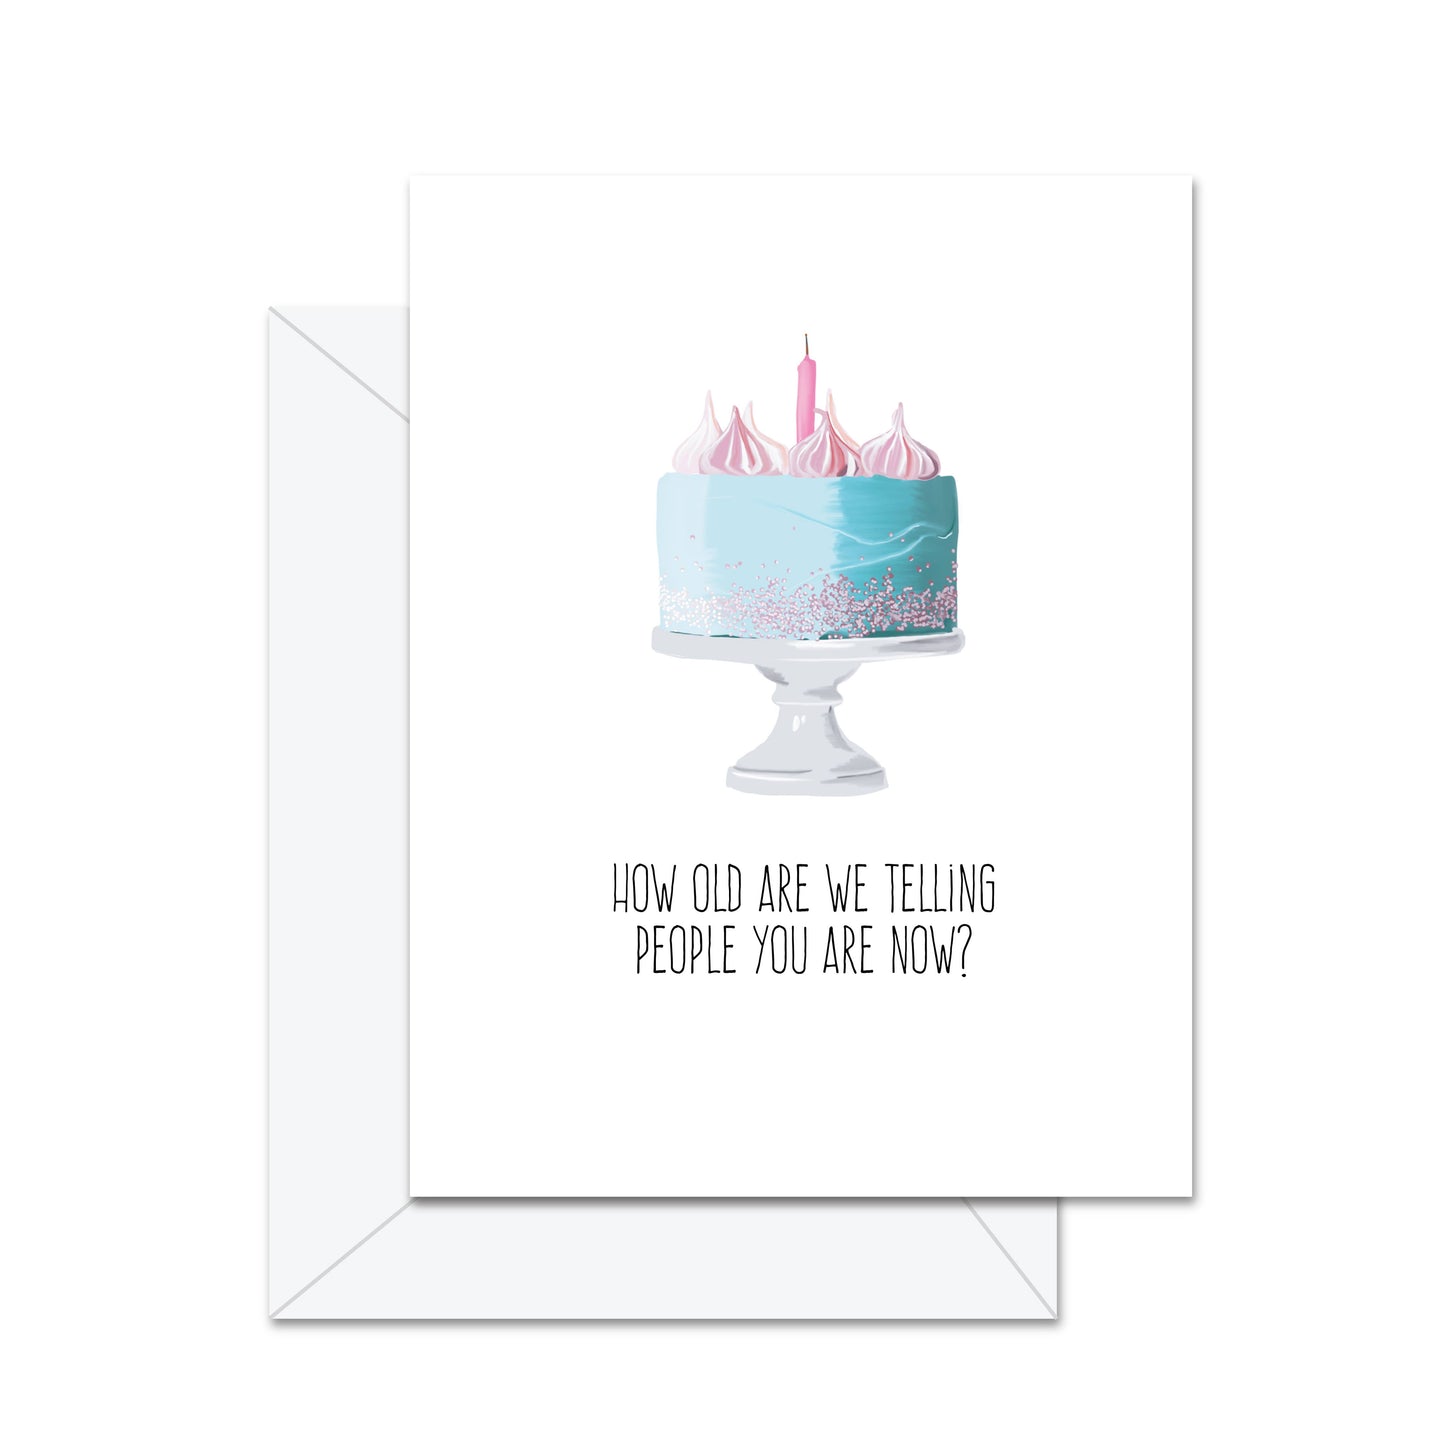 Jaybee Design - How Old Are We Telling People You Are Now? - Greeting Card